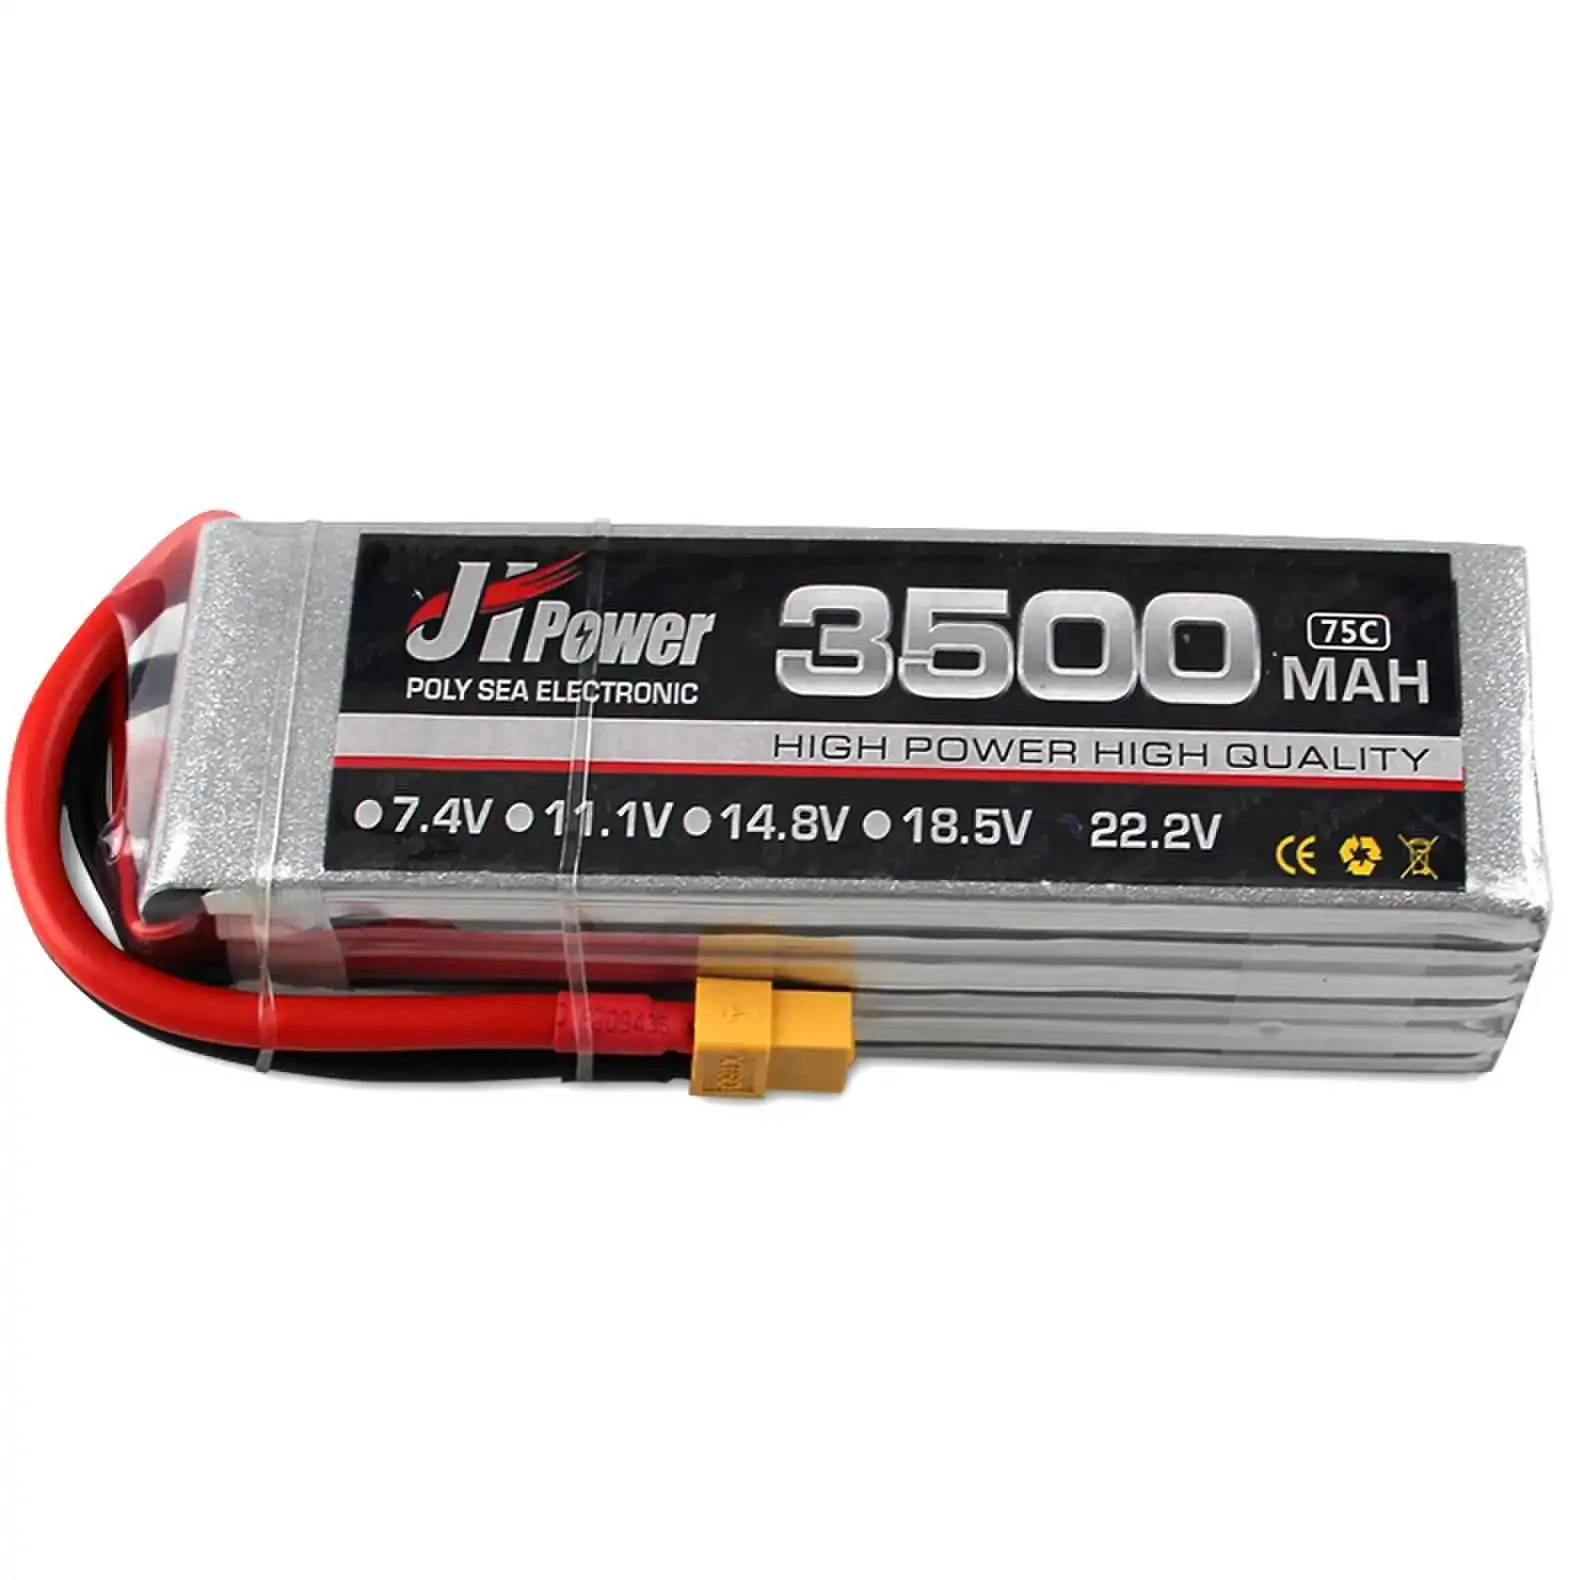 

LiPo 2S 3S 4S 5S 6S 3500mAh RC LiPo Battery 7.4V 11.1V 14.8V 18.5V 22.2V 25C 35C 75C for RC Car Helicopter Boat RC Drone XT60-T